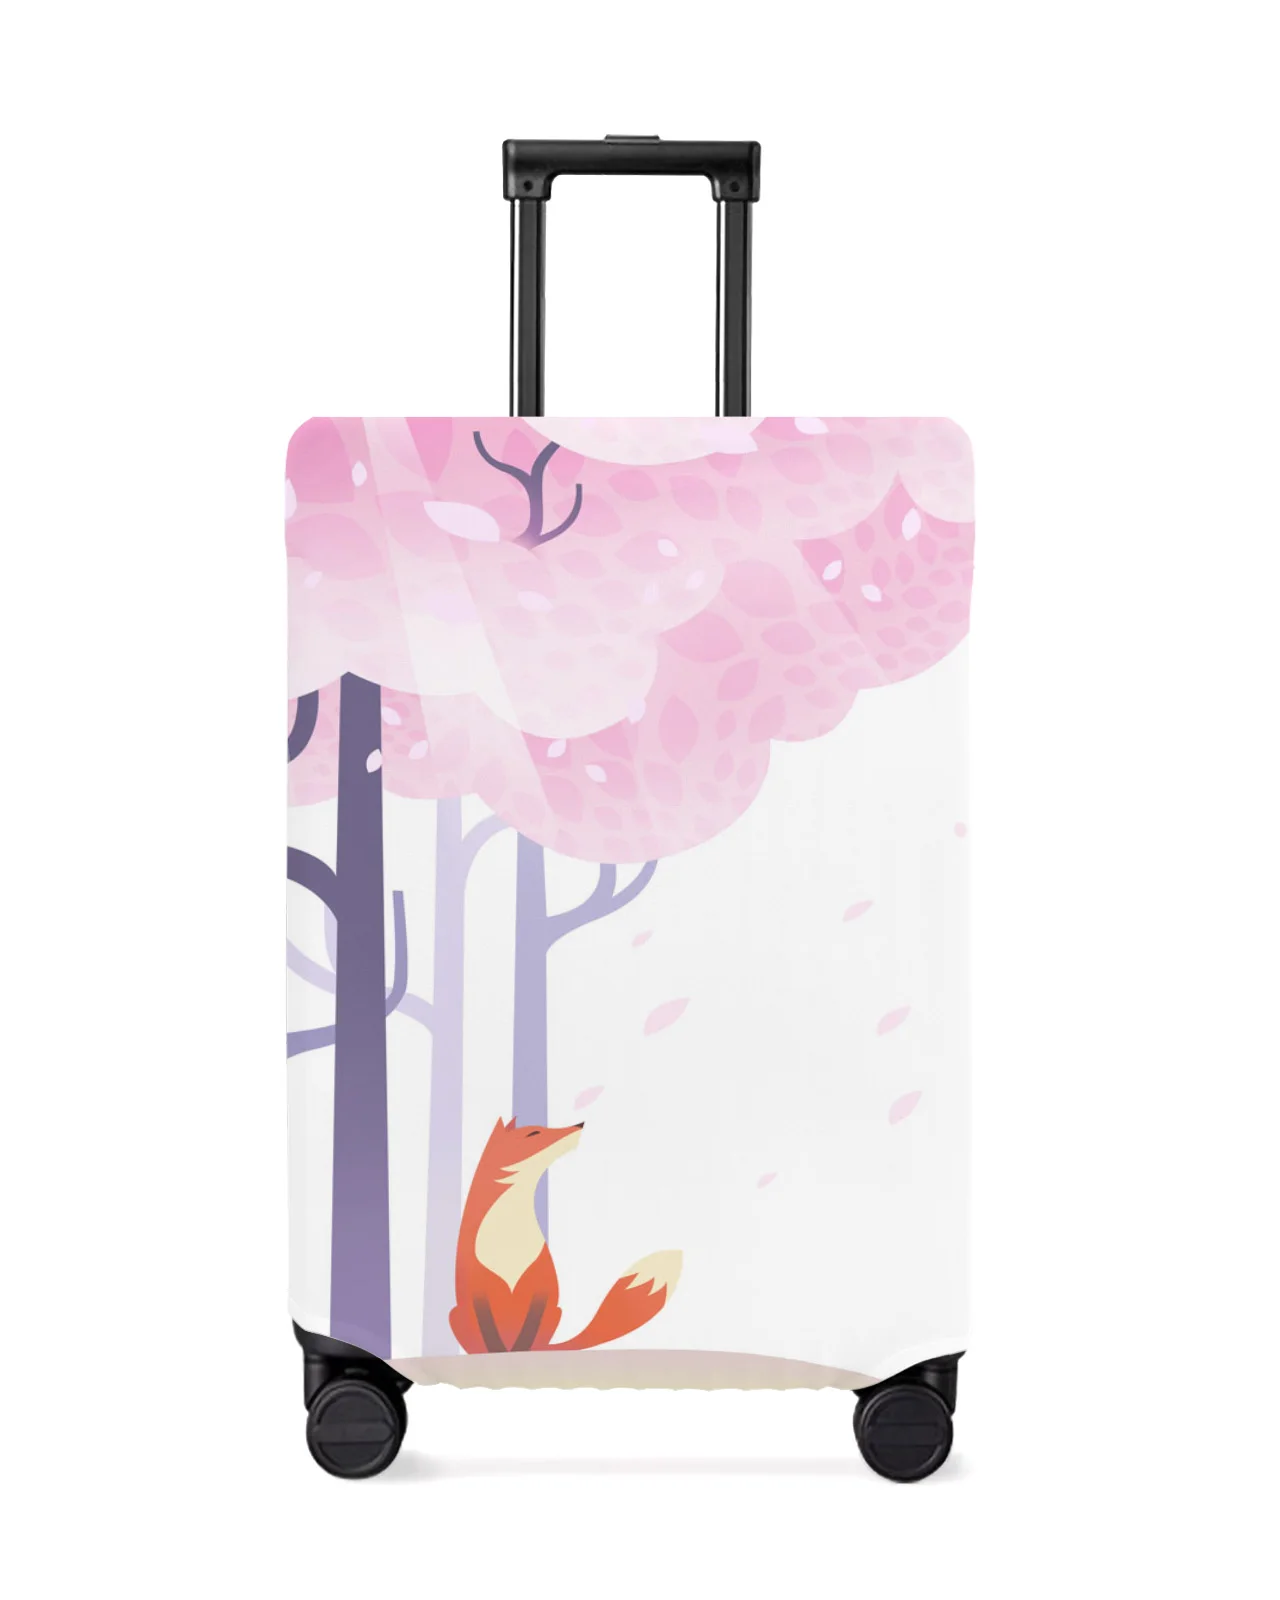 cartoon-cherry-blossom-fox-travel-luggage-protective-cover-for-travel-accessories-suitcase-elastic-dust-case-protect-sleeve